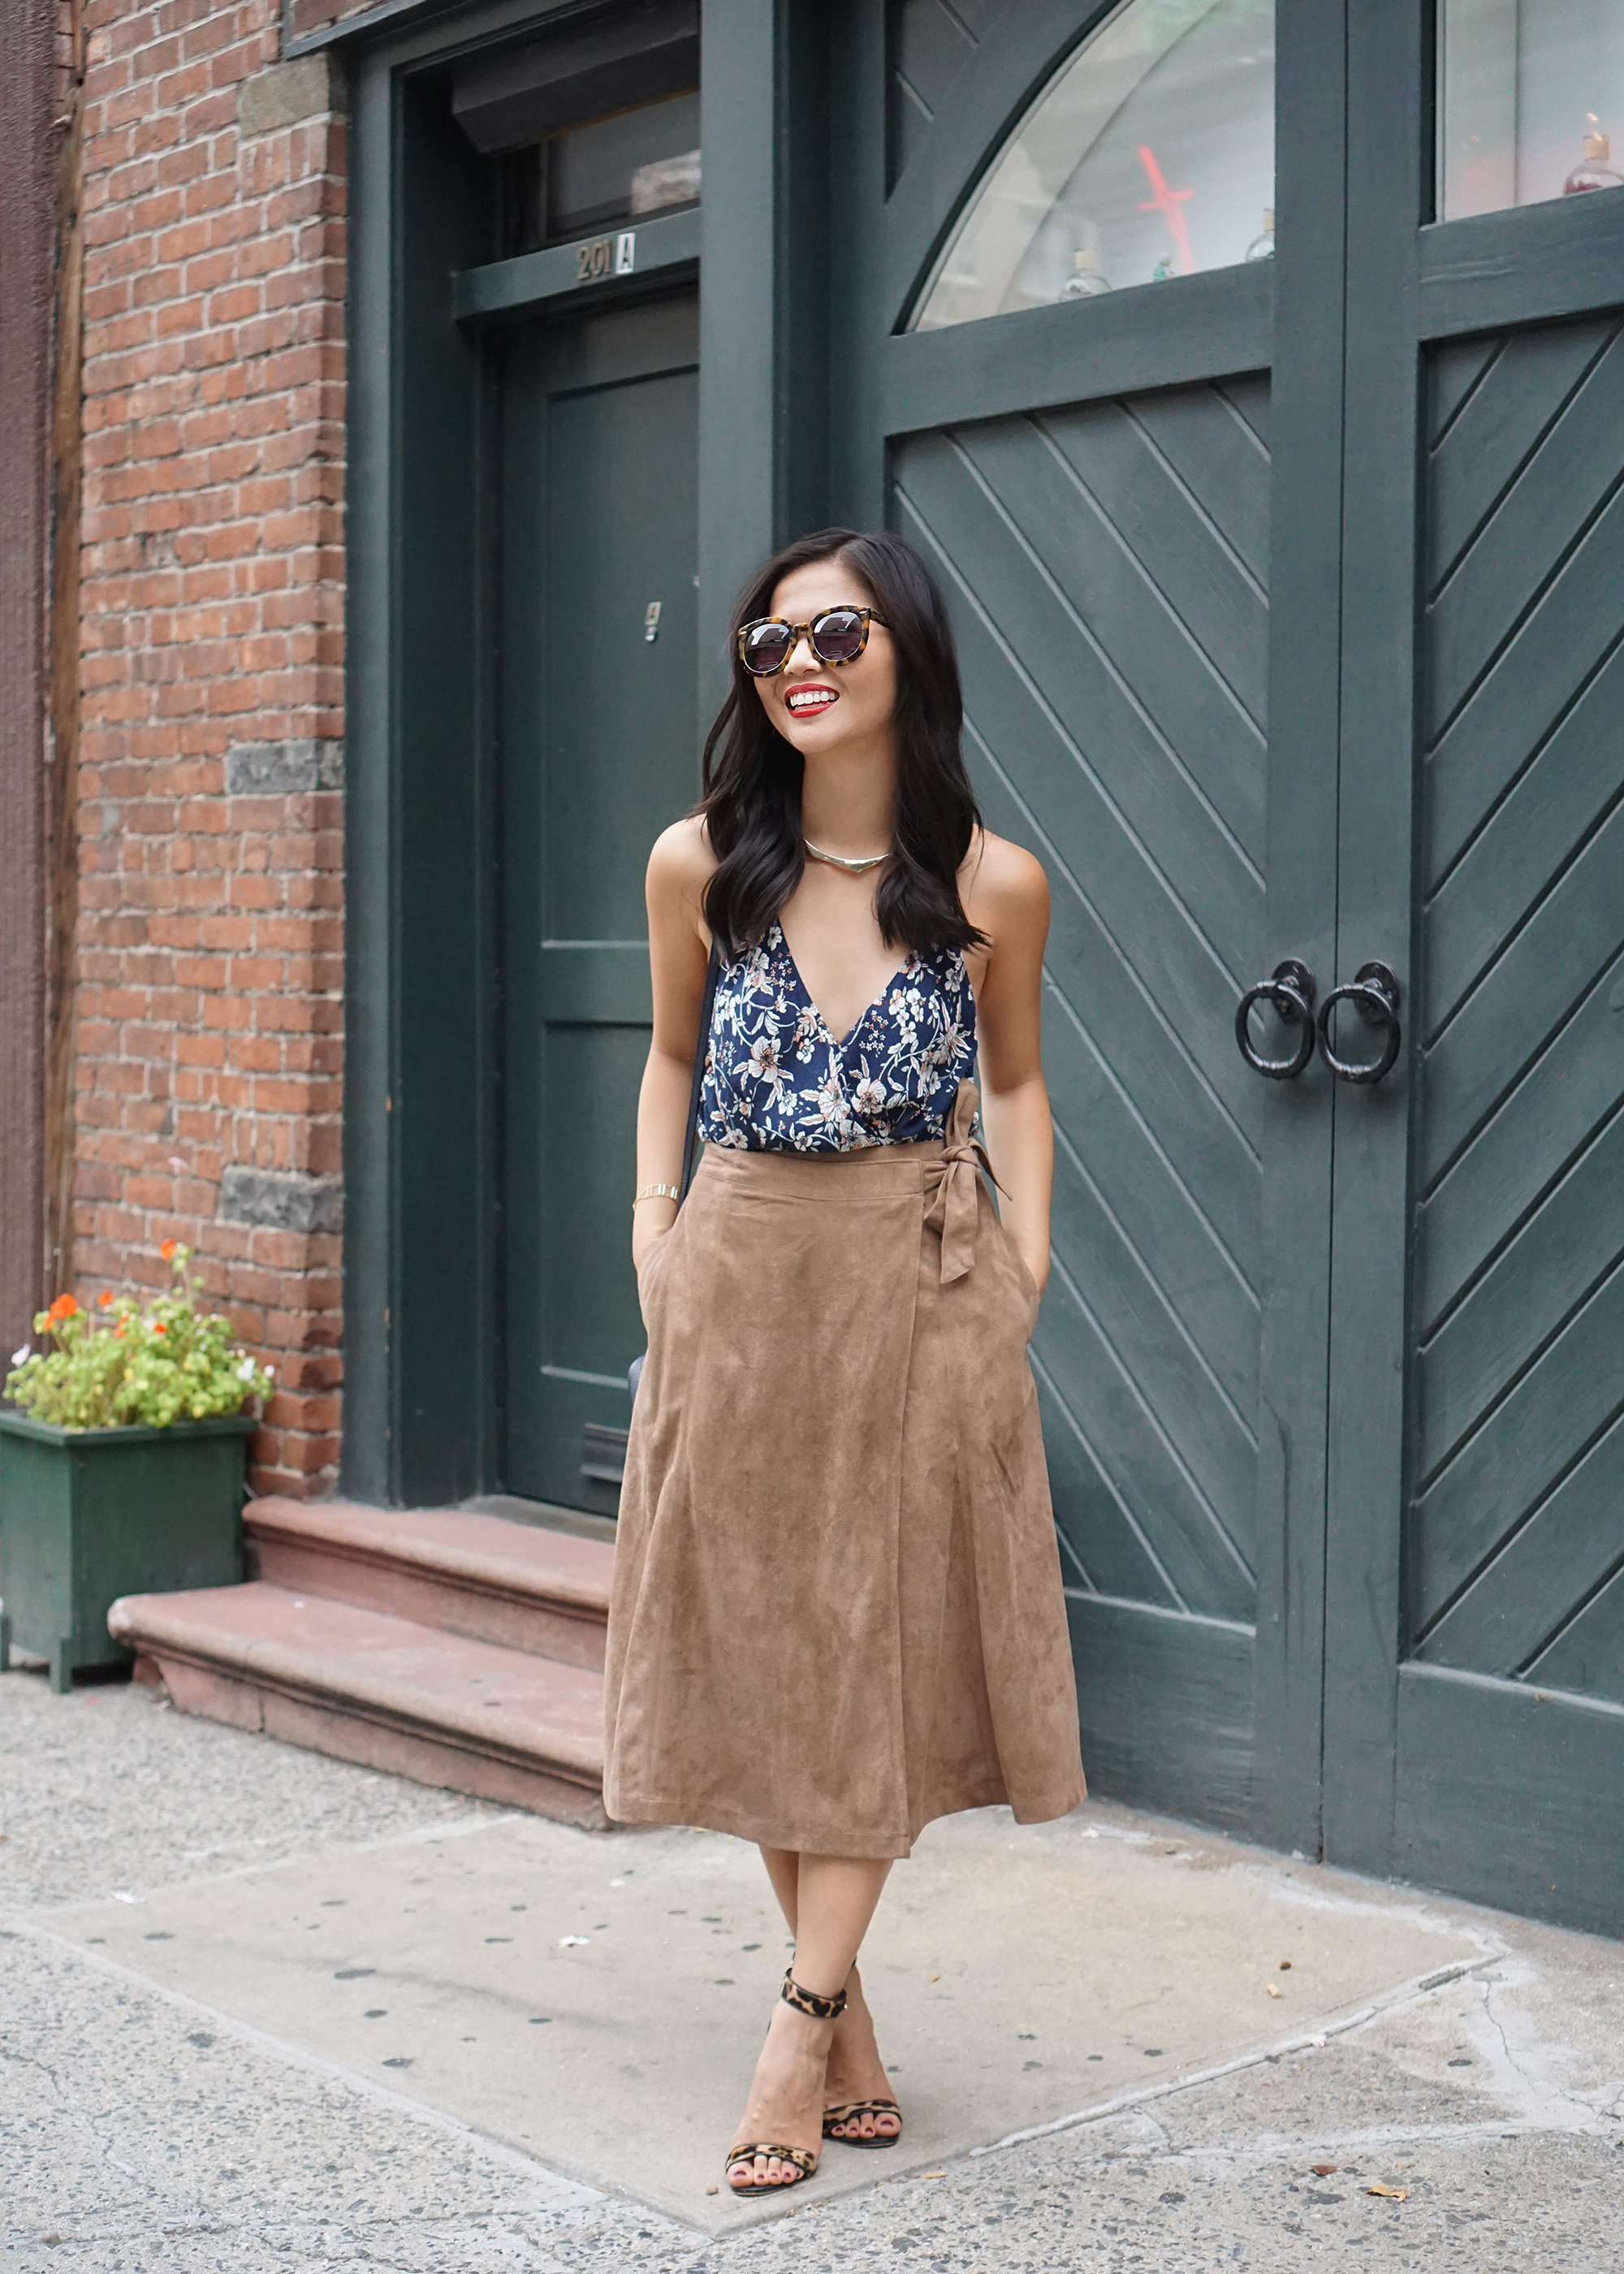 Skirt The Rules / Fall Floral Top & Suede Midi Skirt